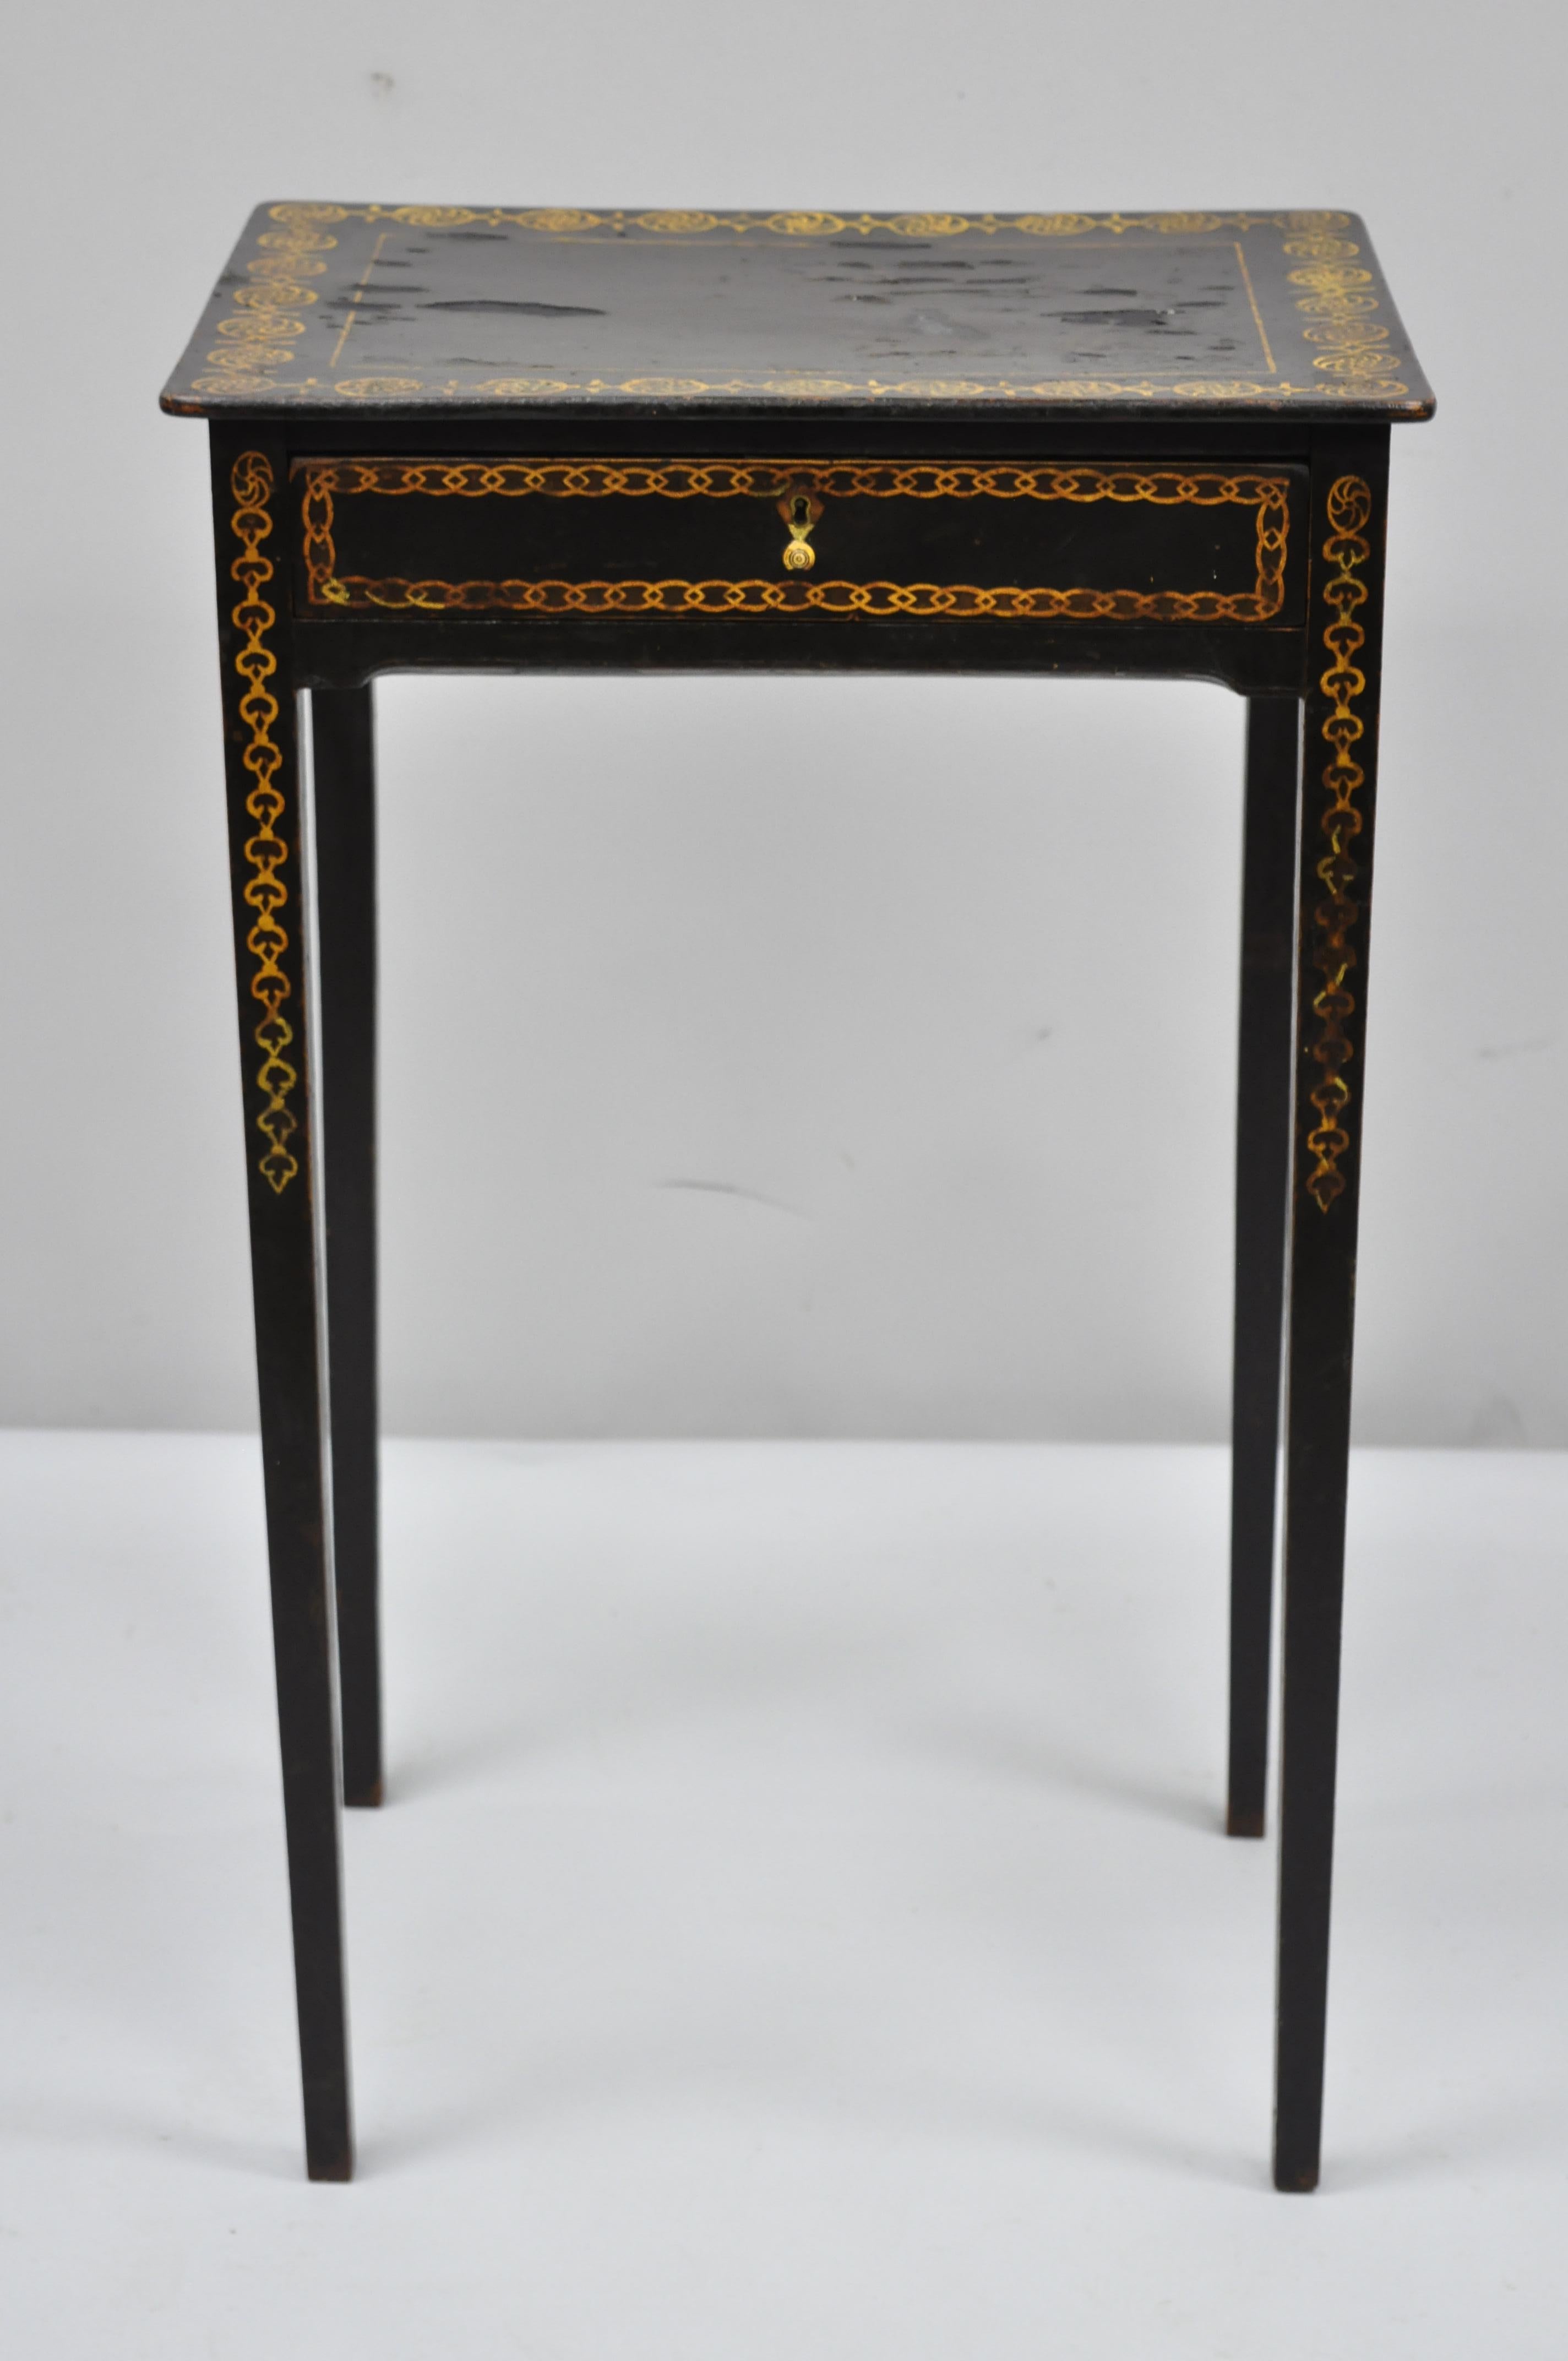 19th century black lacquer hand painted English Victorian side table. Item features paint decorated on all sides, black lacquer finish, solid wood construction, no key but unlocked, tall tapered legs, very nice antique item, circa early 19th